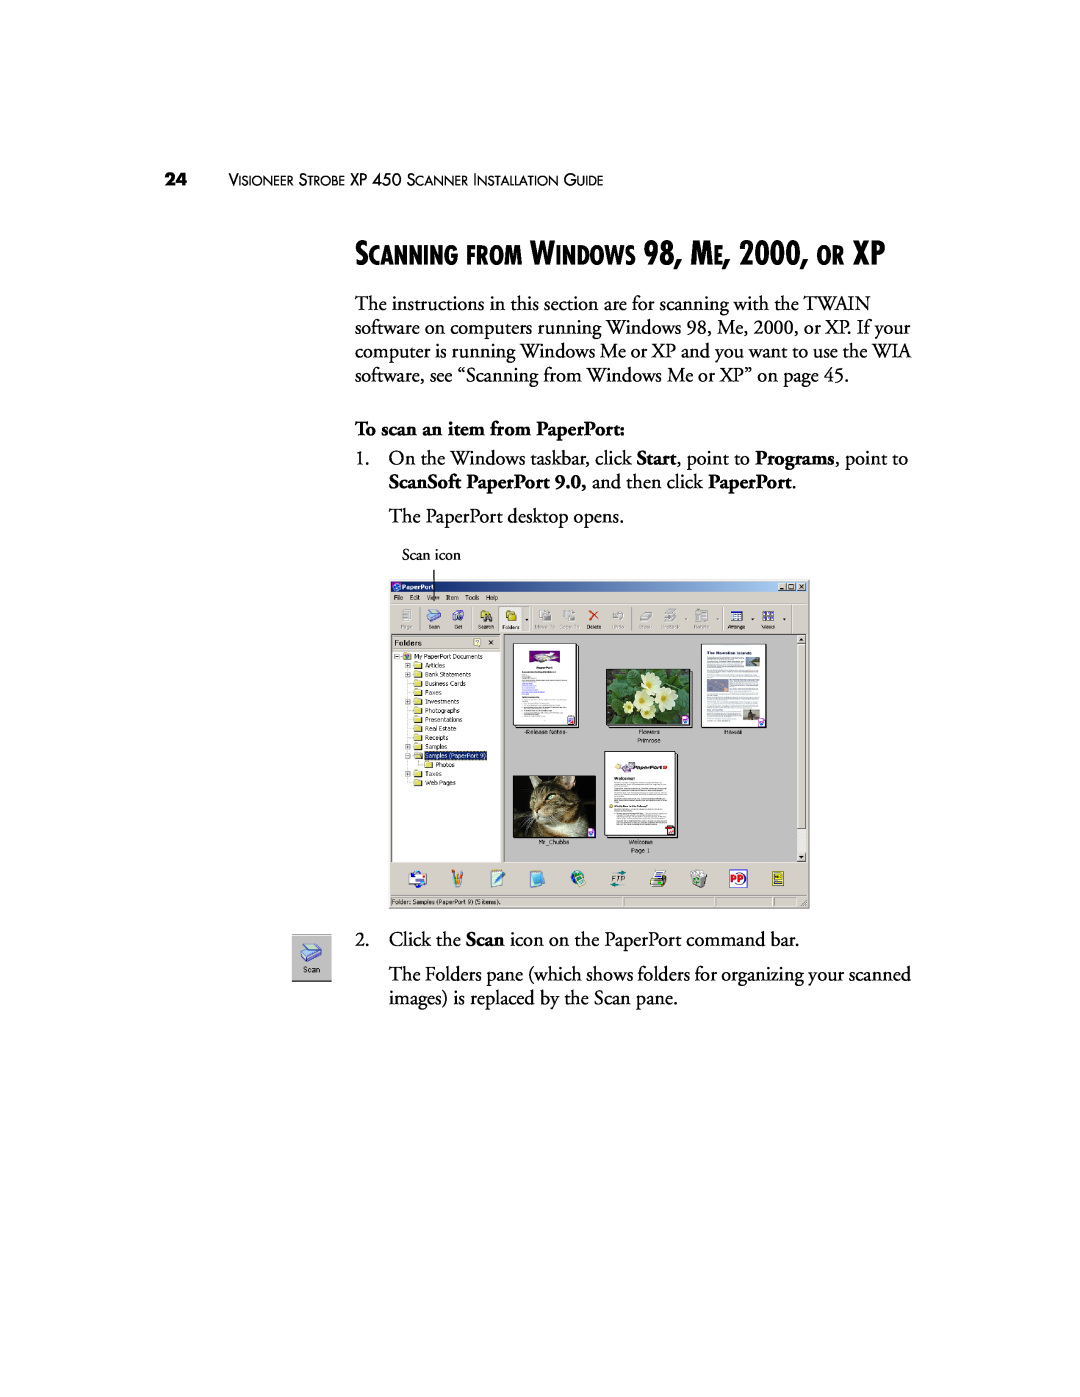 Visioneer XP 450 manual SCANNING FROM WINDOWS 98, ME, 2000, OR XP, To scan an item from PaperPort 